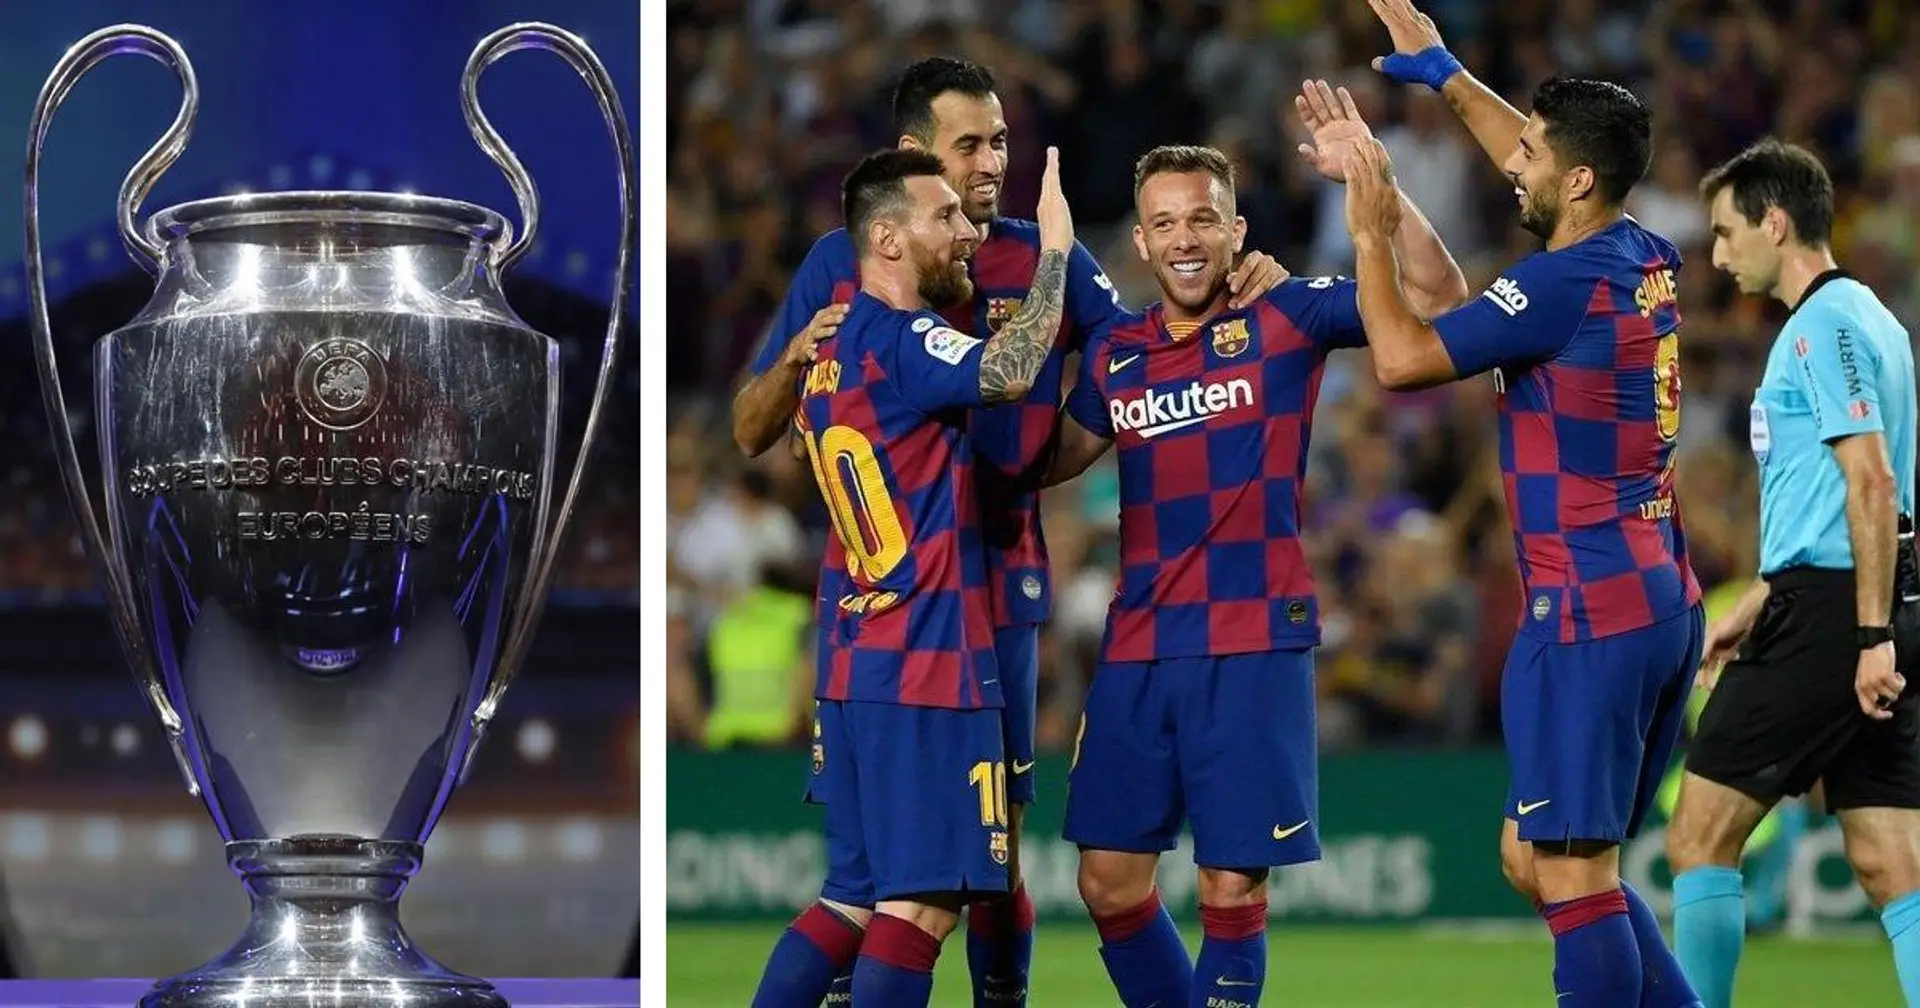 Champions League quarter-final and semi-final draw in full